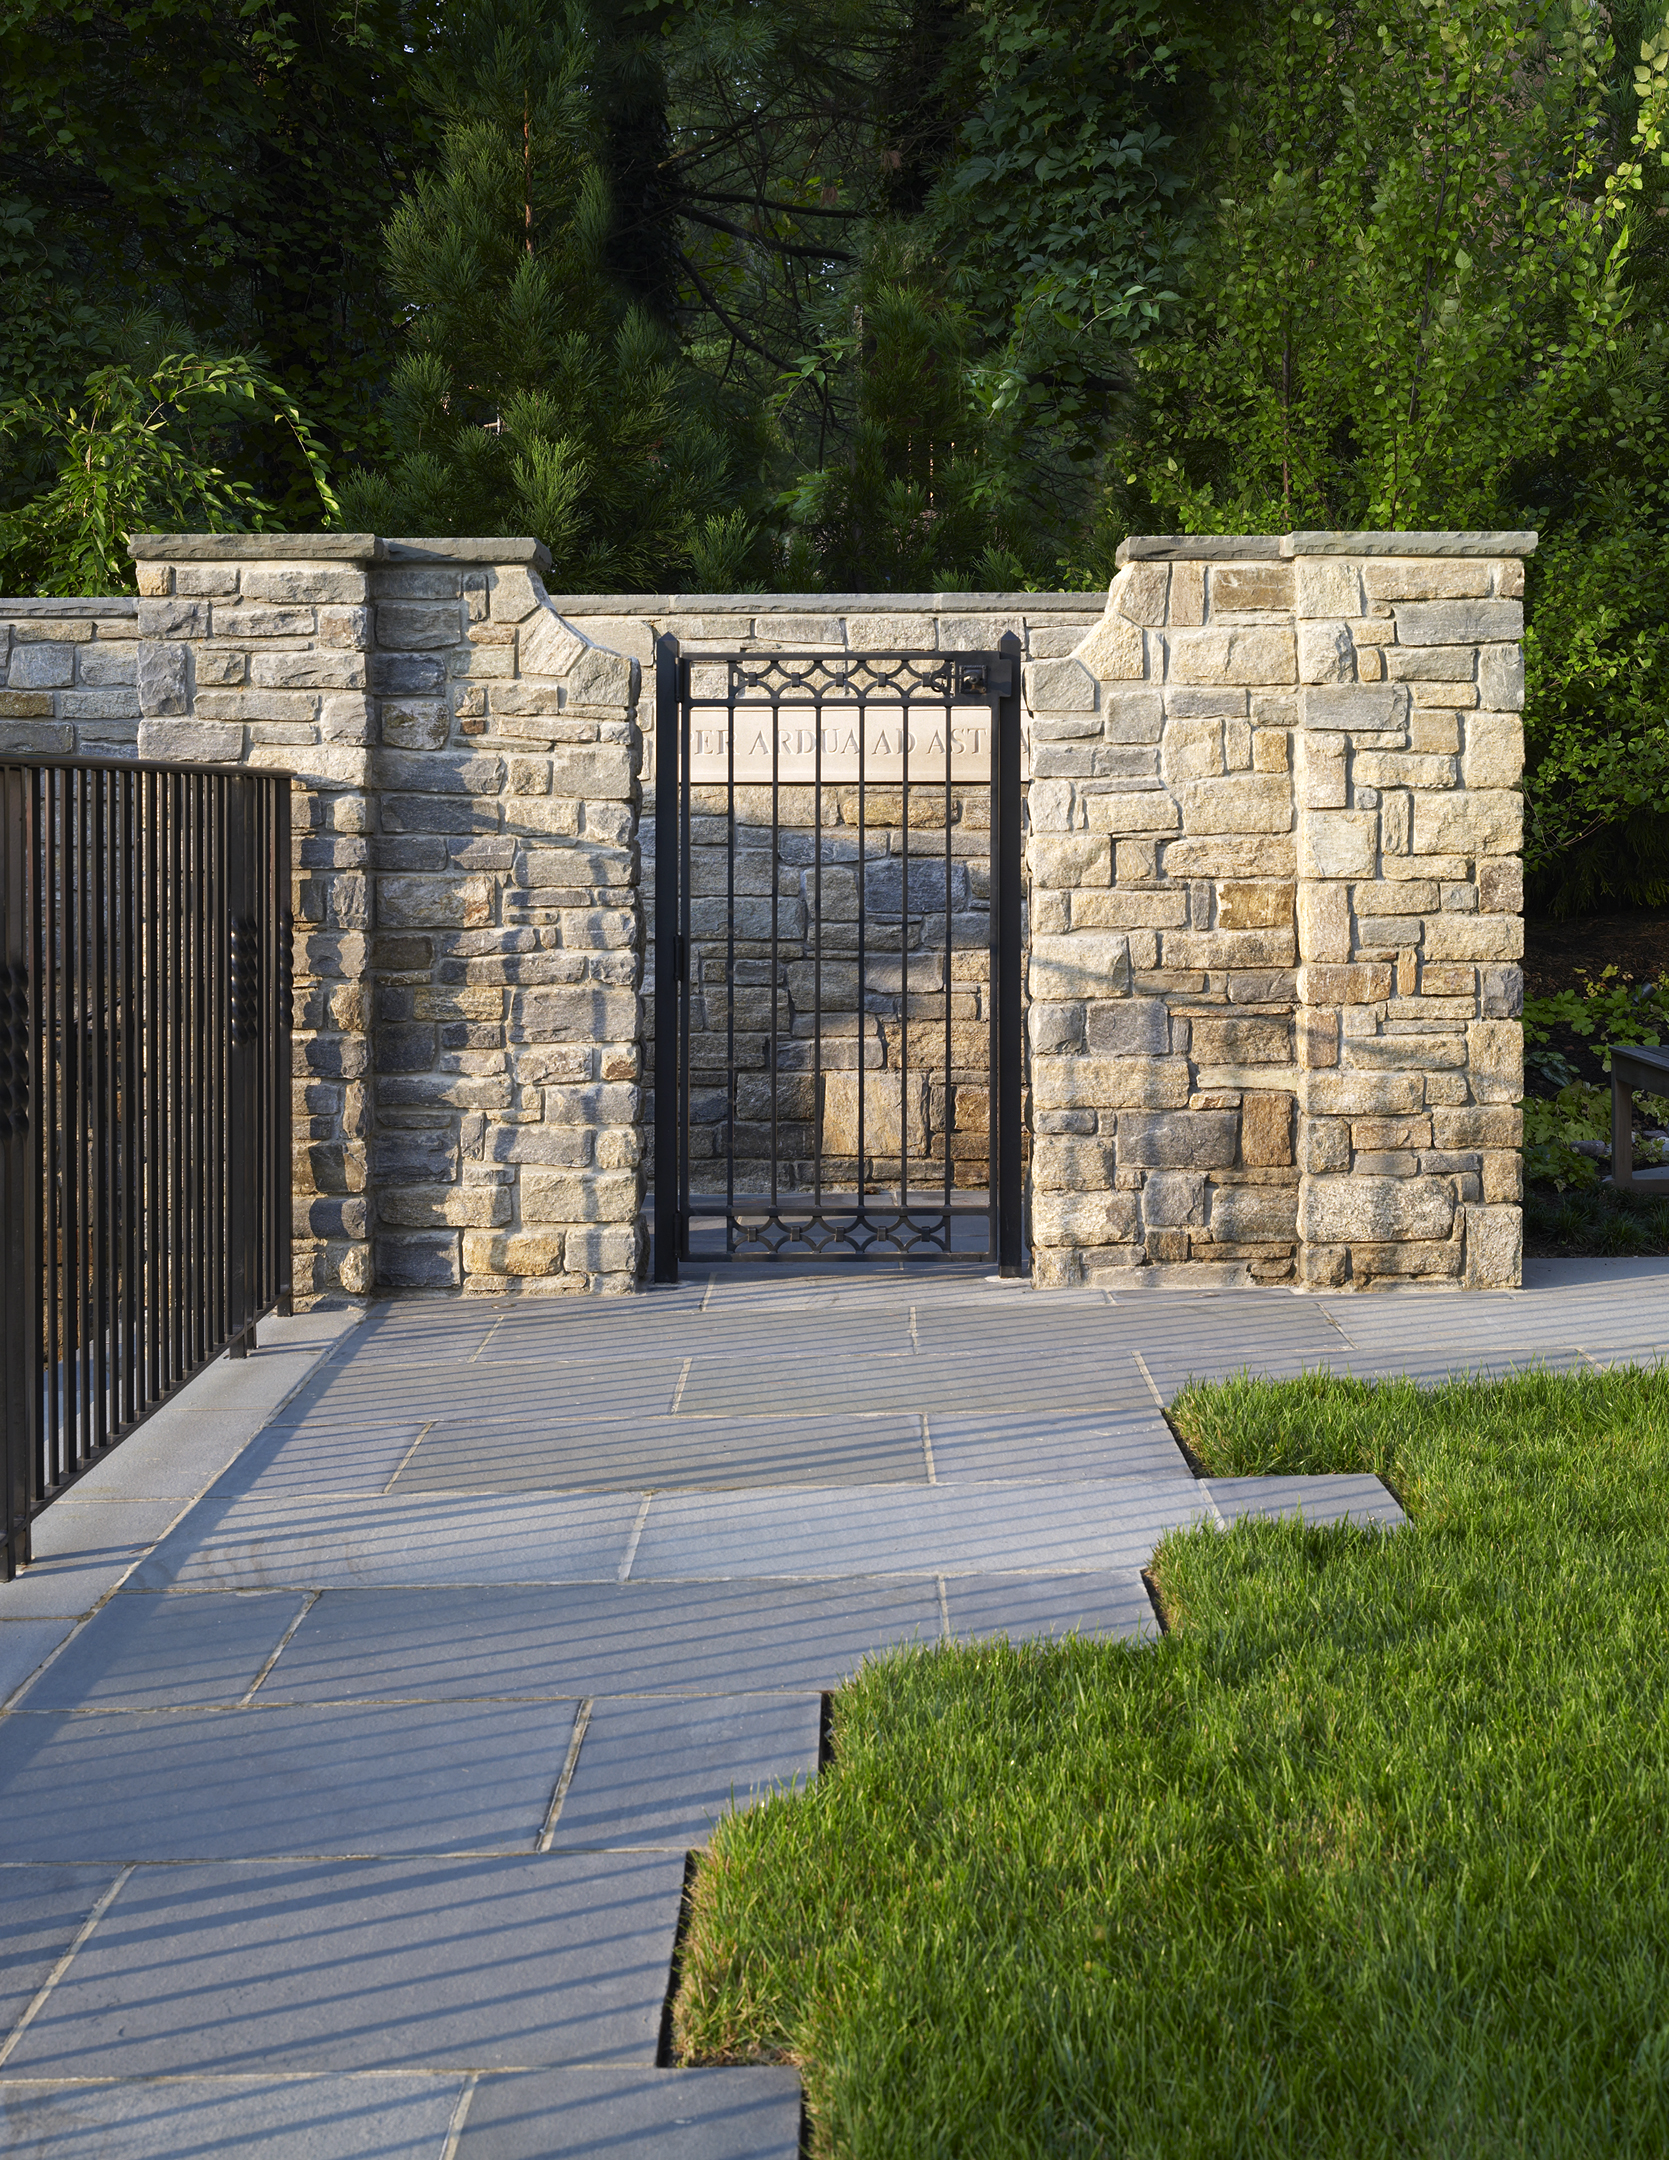   Project Location:  McLean, Virginia  Completion:  &nbsp;2008  General Contractor:  Tilson Group  Primary Material Palette:  fieldstone, bluestone  Photos By:  Allen Russ 